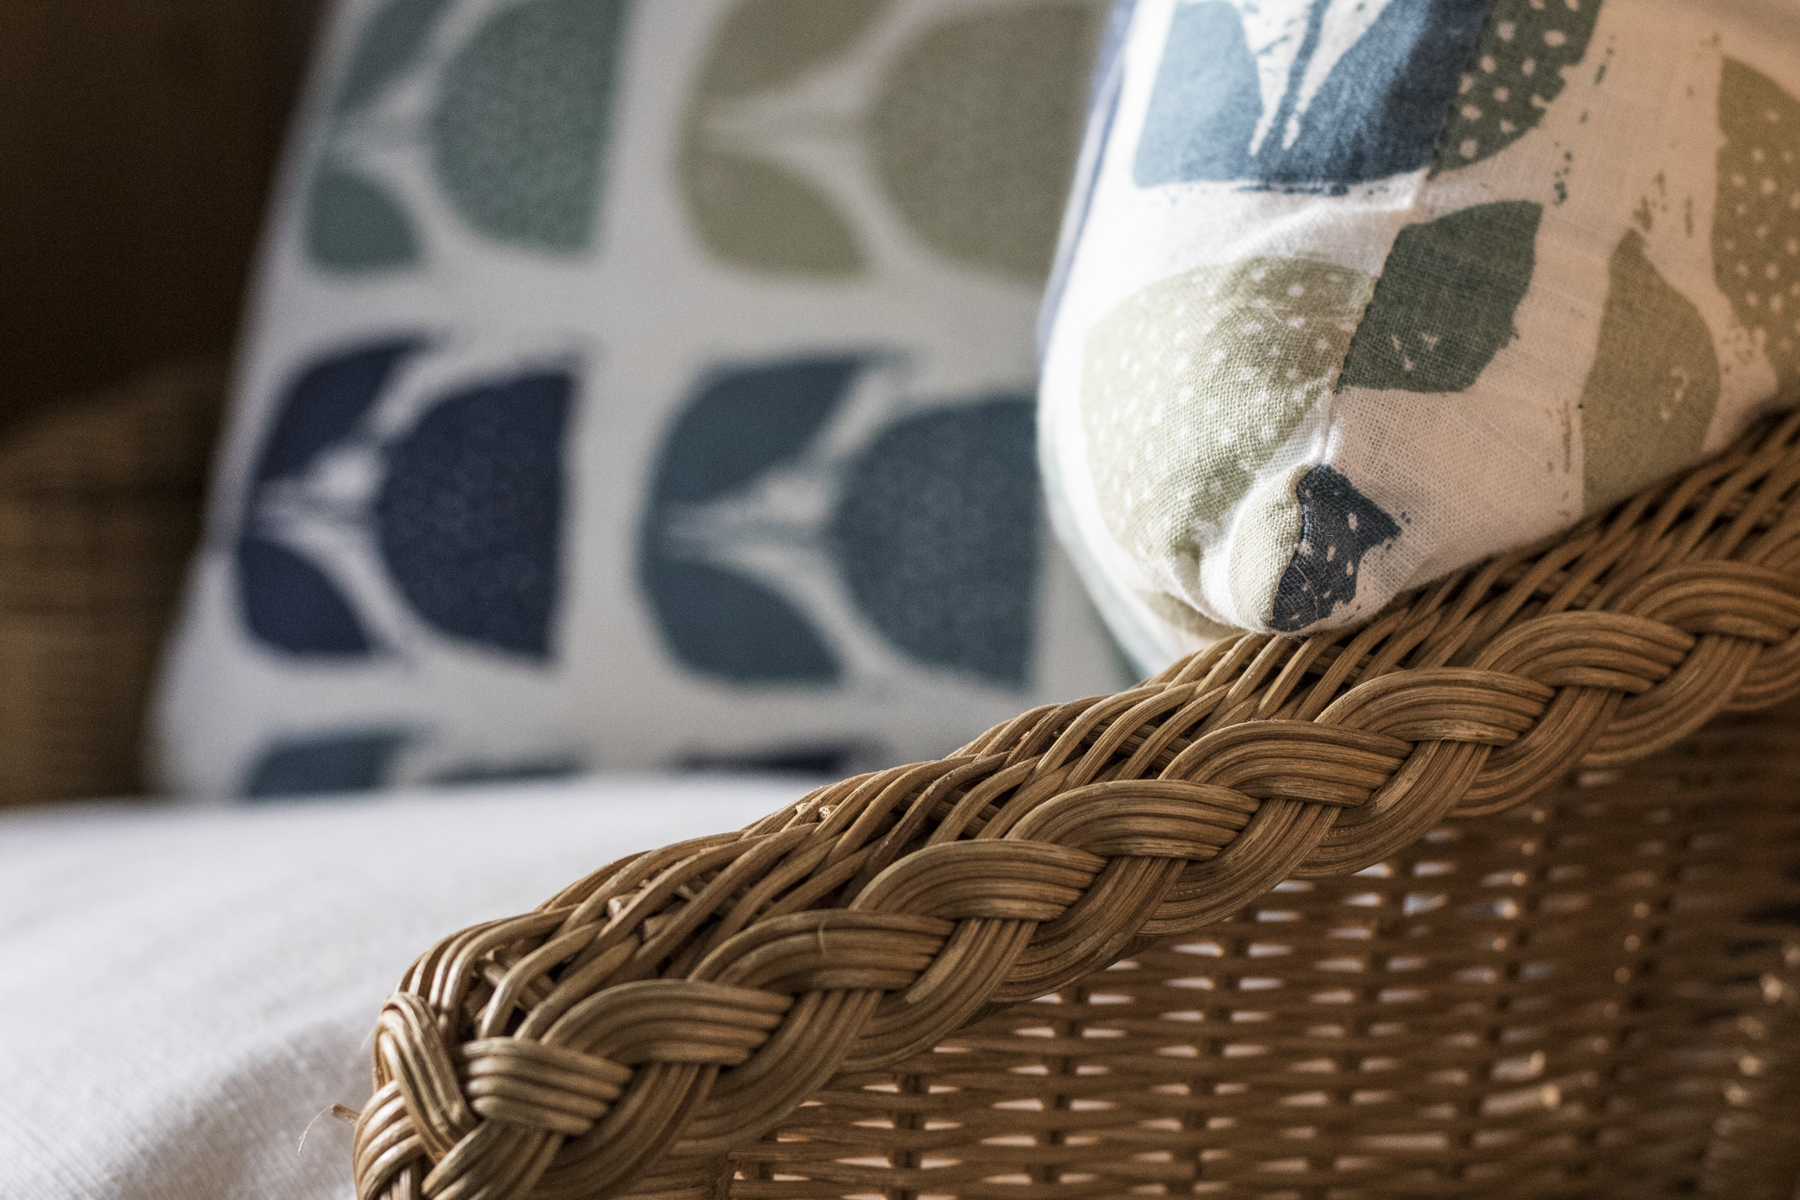 detailed shot of wicker chair completed by two beautiful cushions